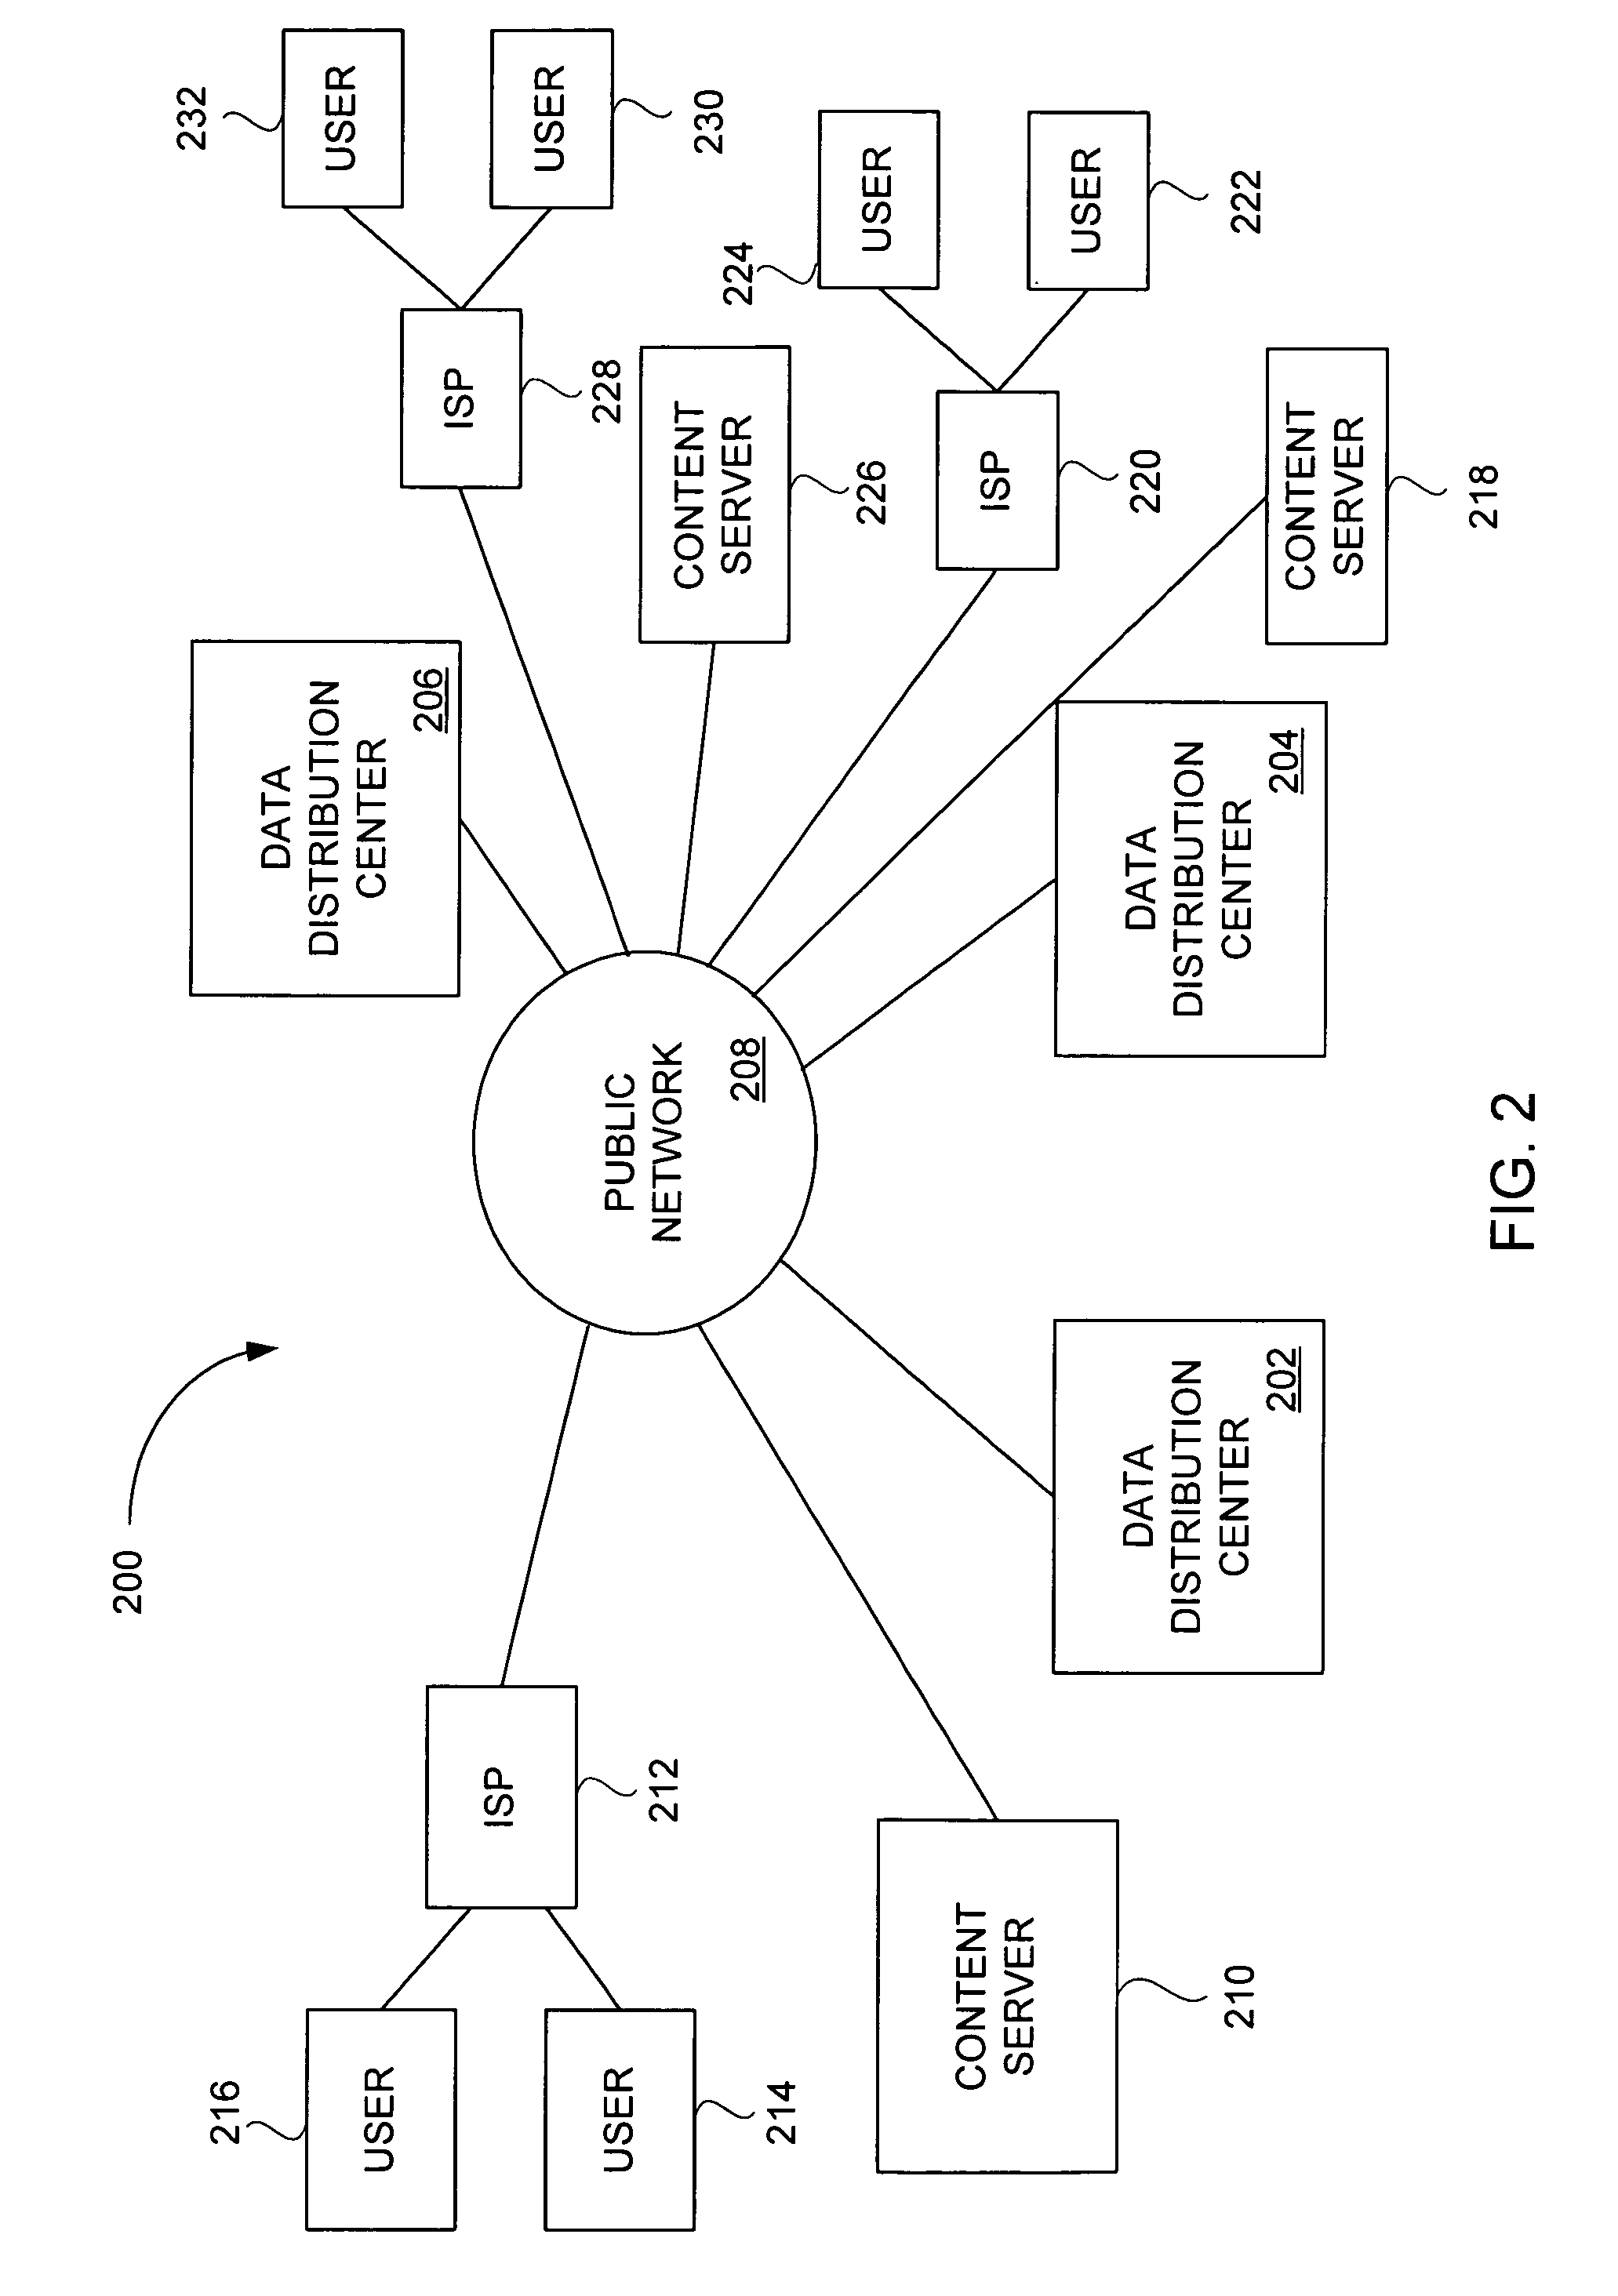 Method and system for reduction of delay and bandwidth requirements in internet data transfer